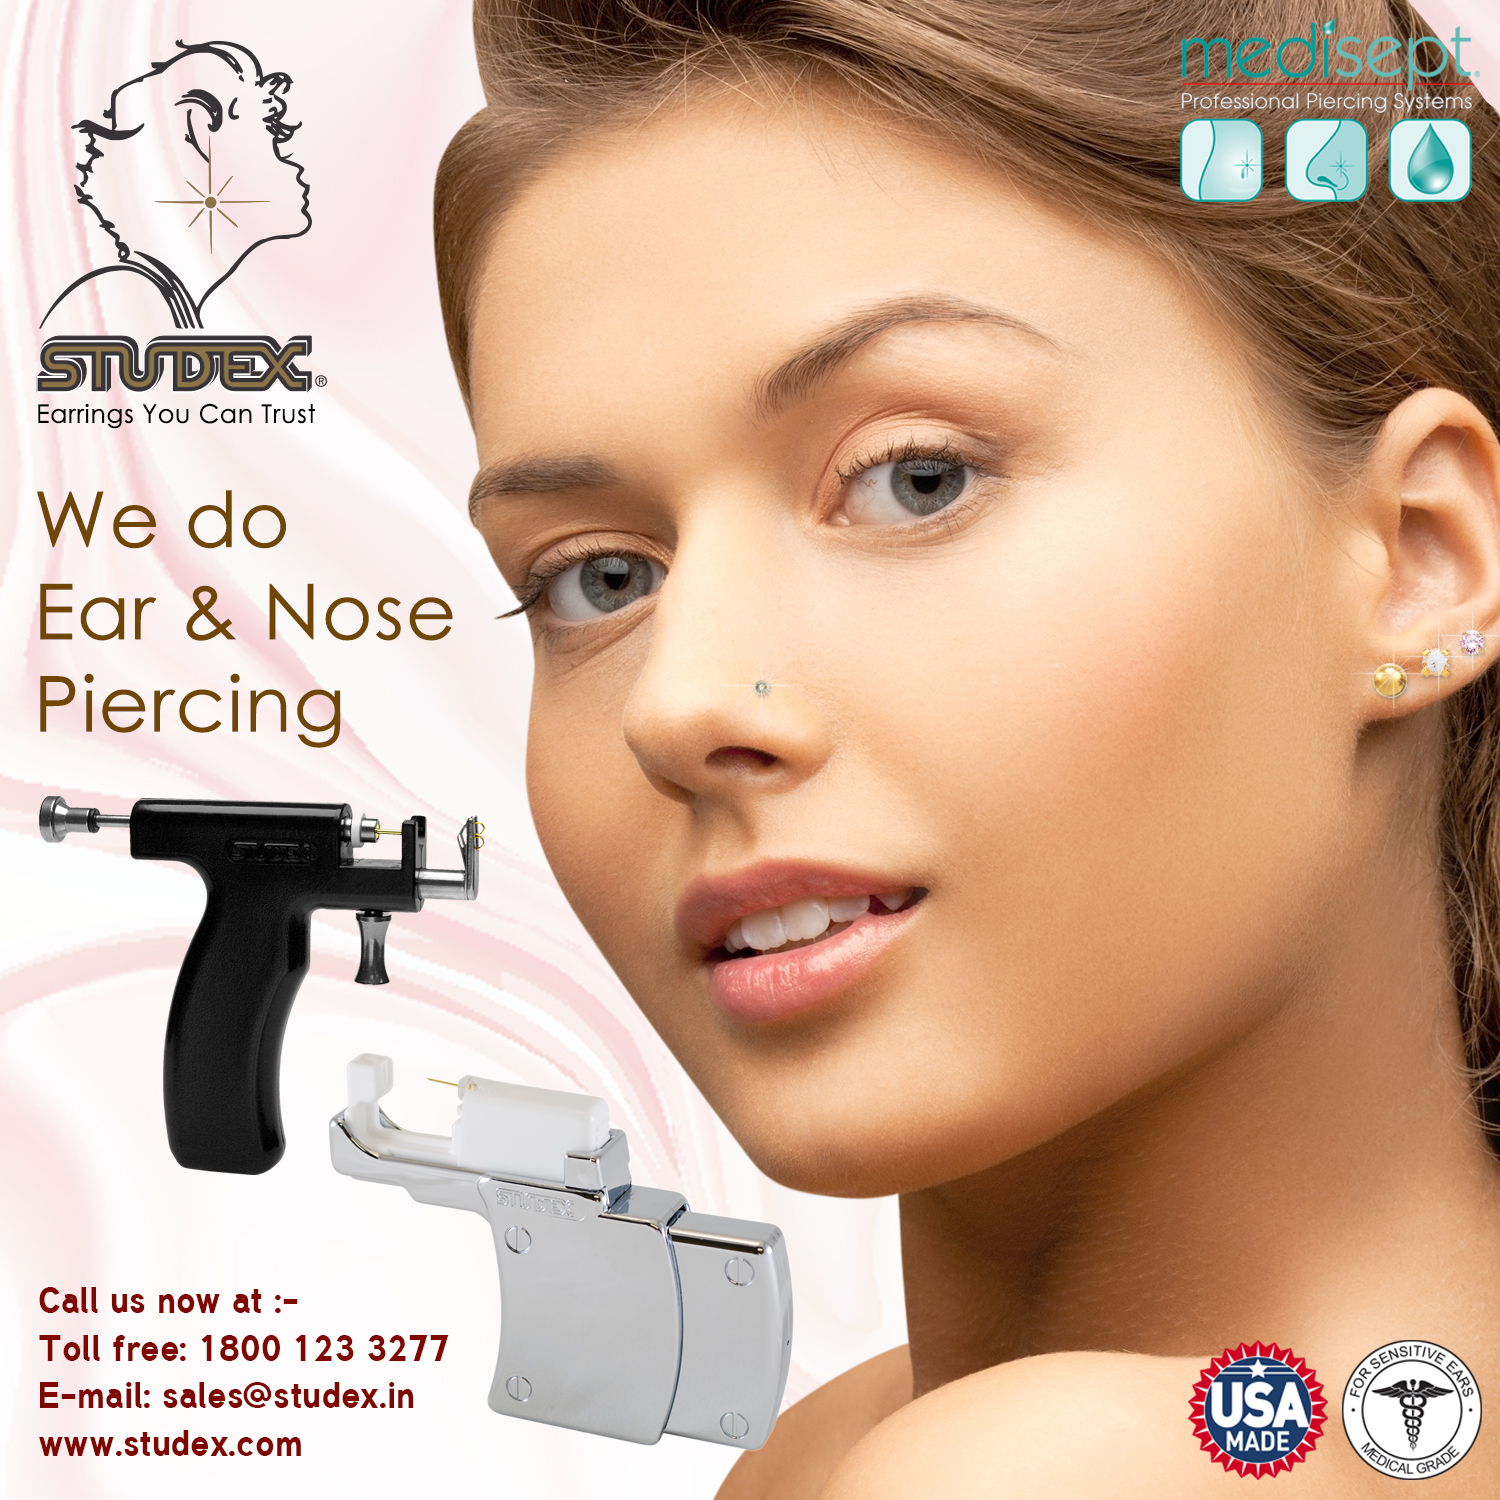 We do professional ear and nose piercing. For more details contact us at sales@studex.in